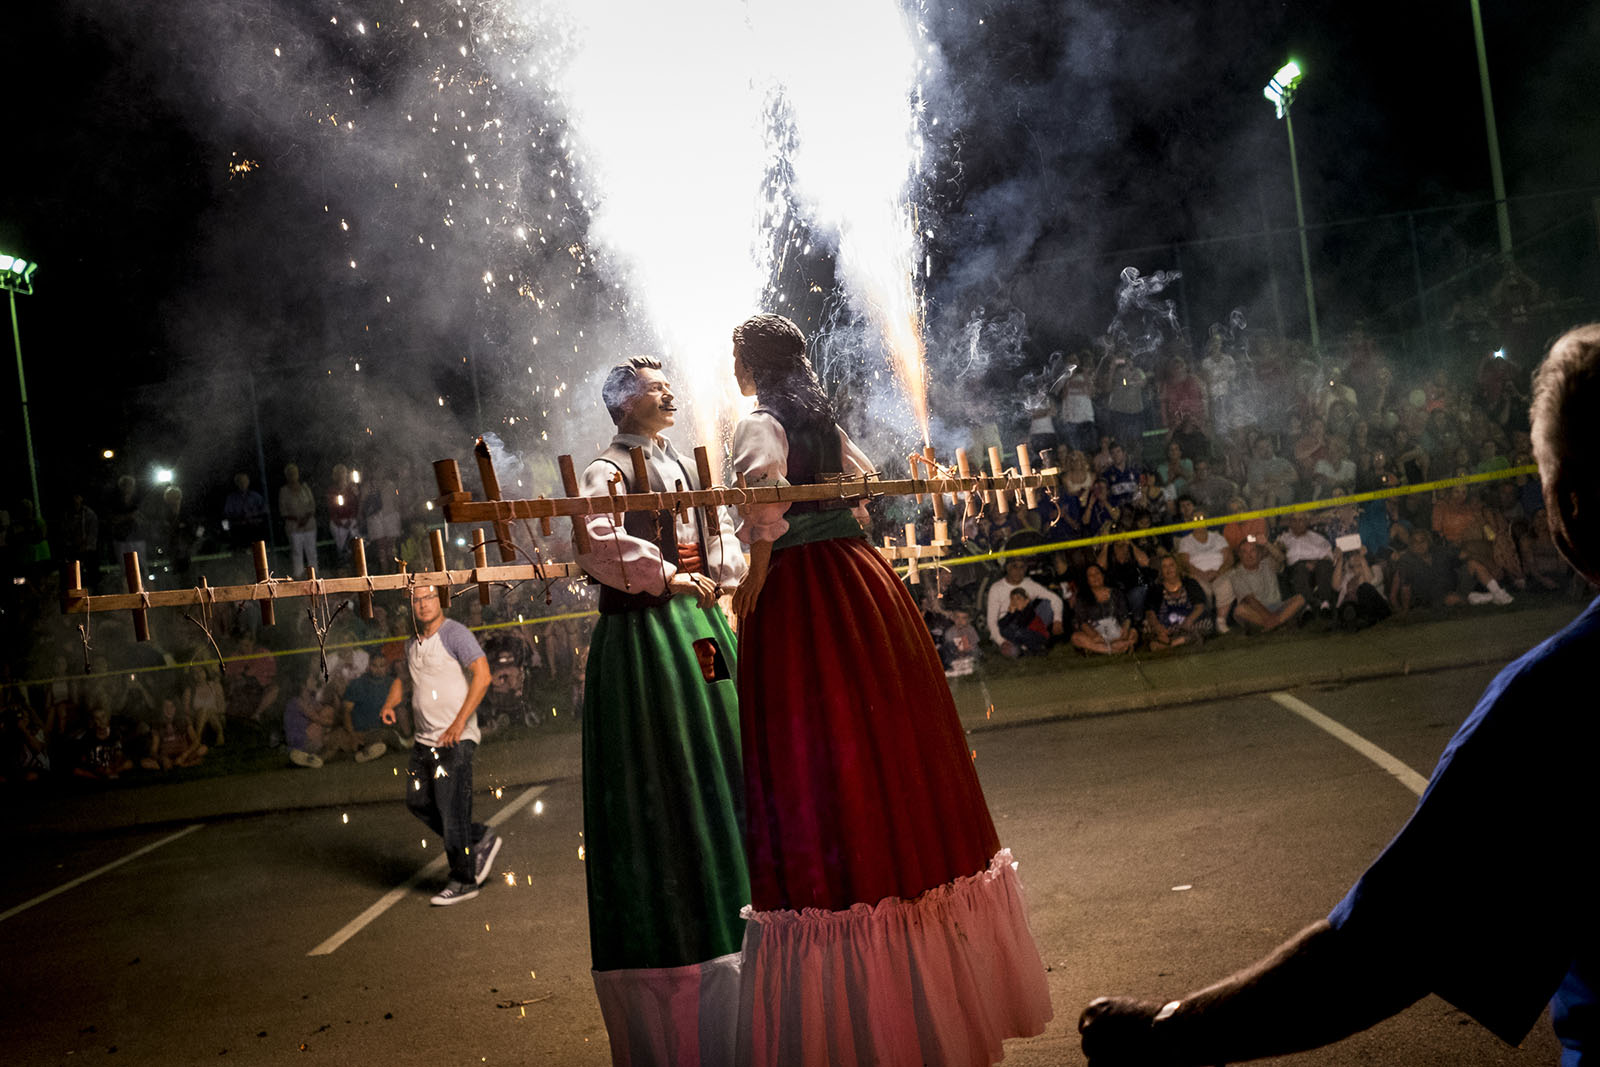 Two dolls dance together while fireworks are lit brightly in the background.